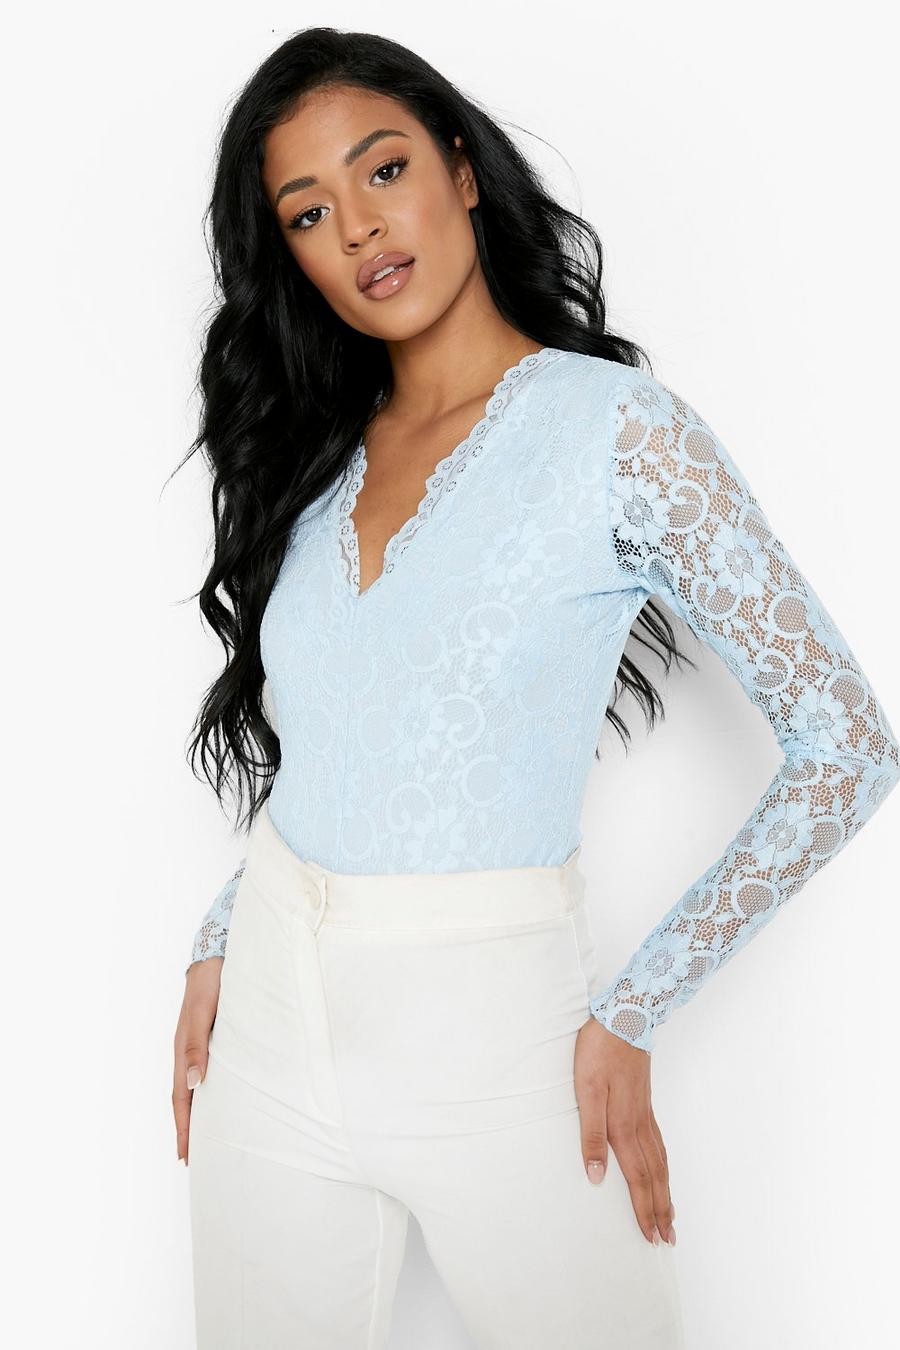 White High Neck Sheer Lace Bodysuit, Tops